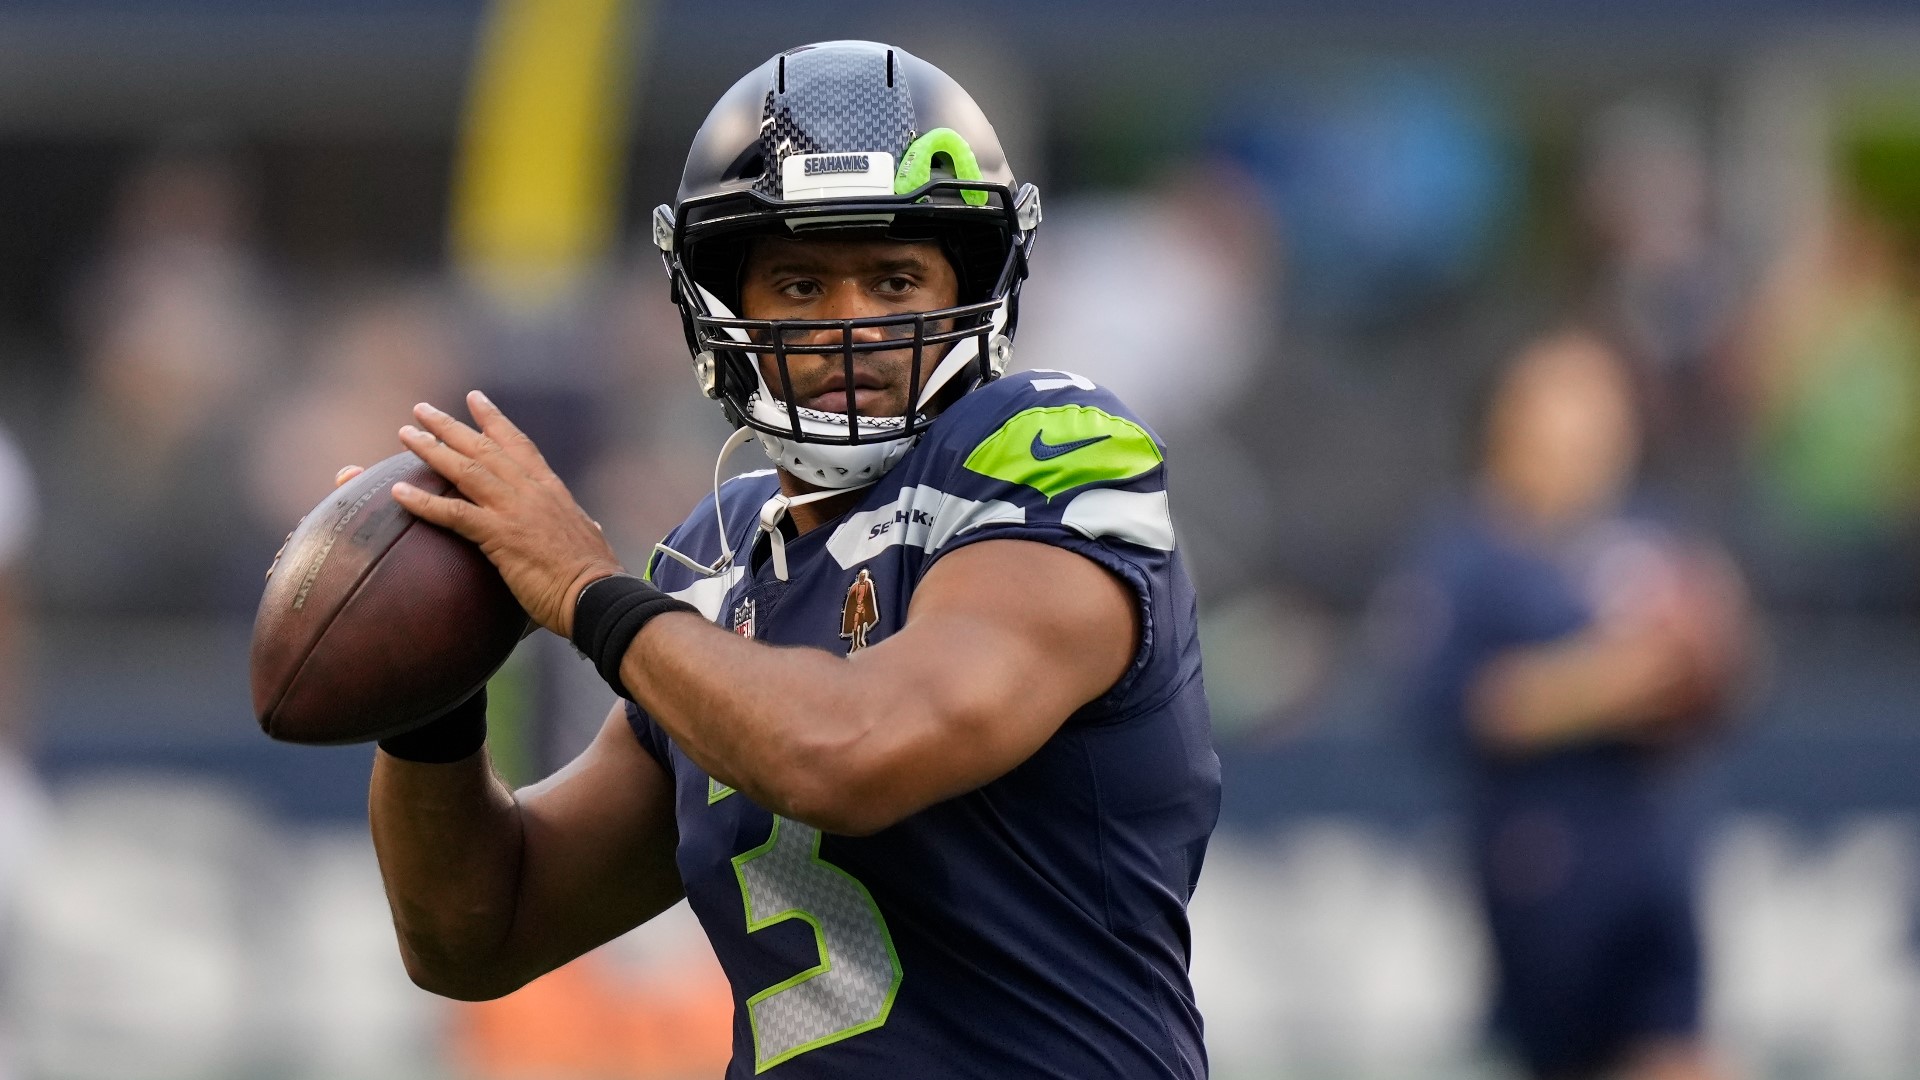 Jacob Tobey and Chris Bianchi discuss the latest on the Denver Broncos trade for quarterback Russell Wilson.